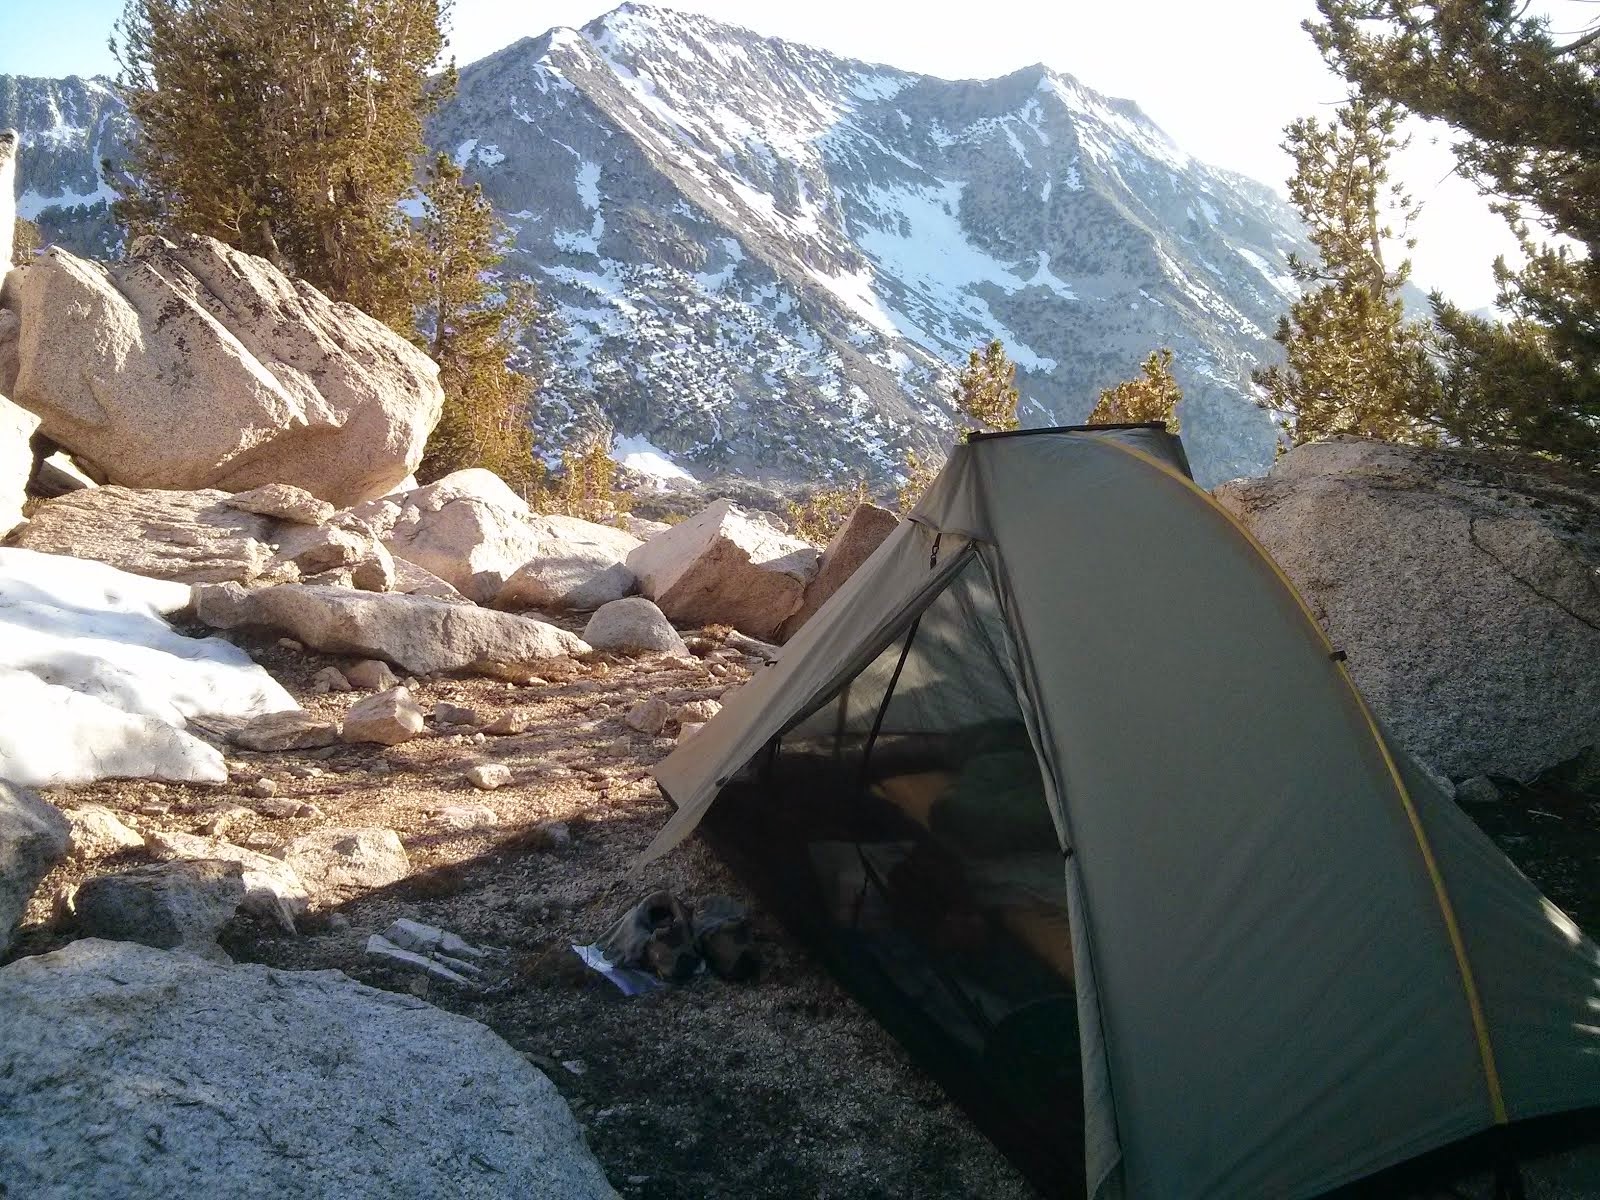 My campsite for the night, several miles before Glenn Pass